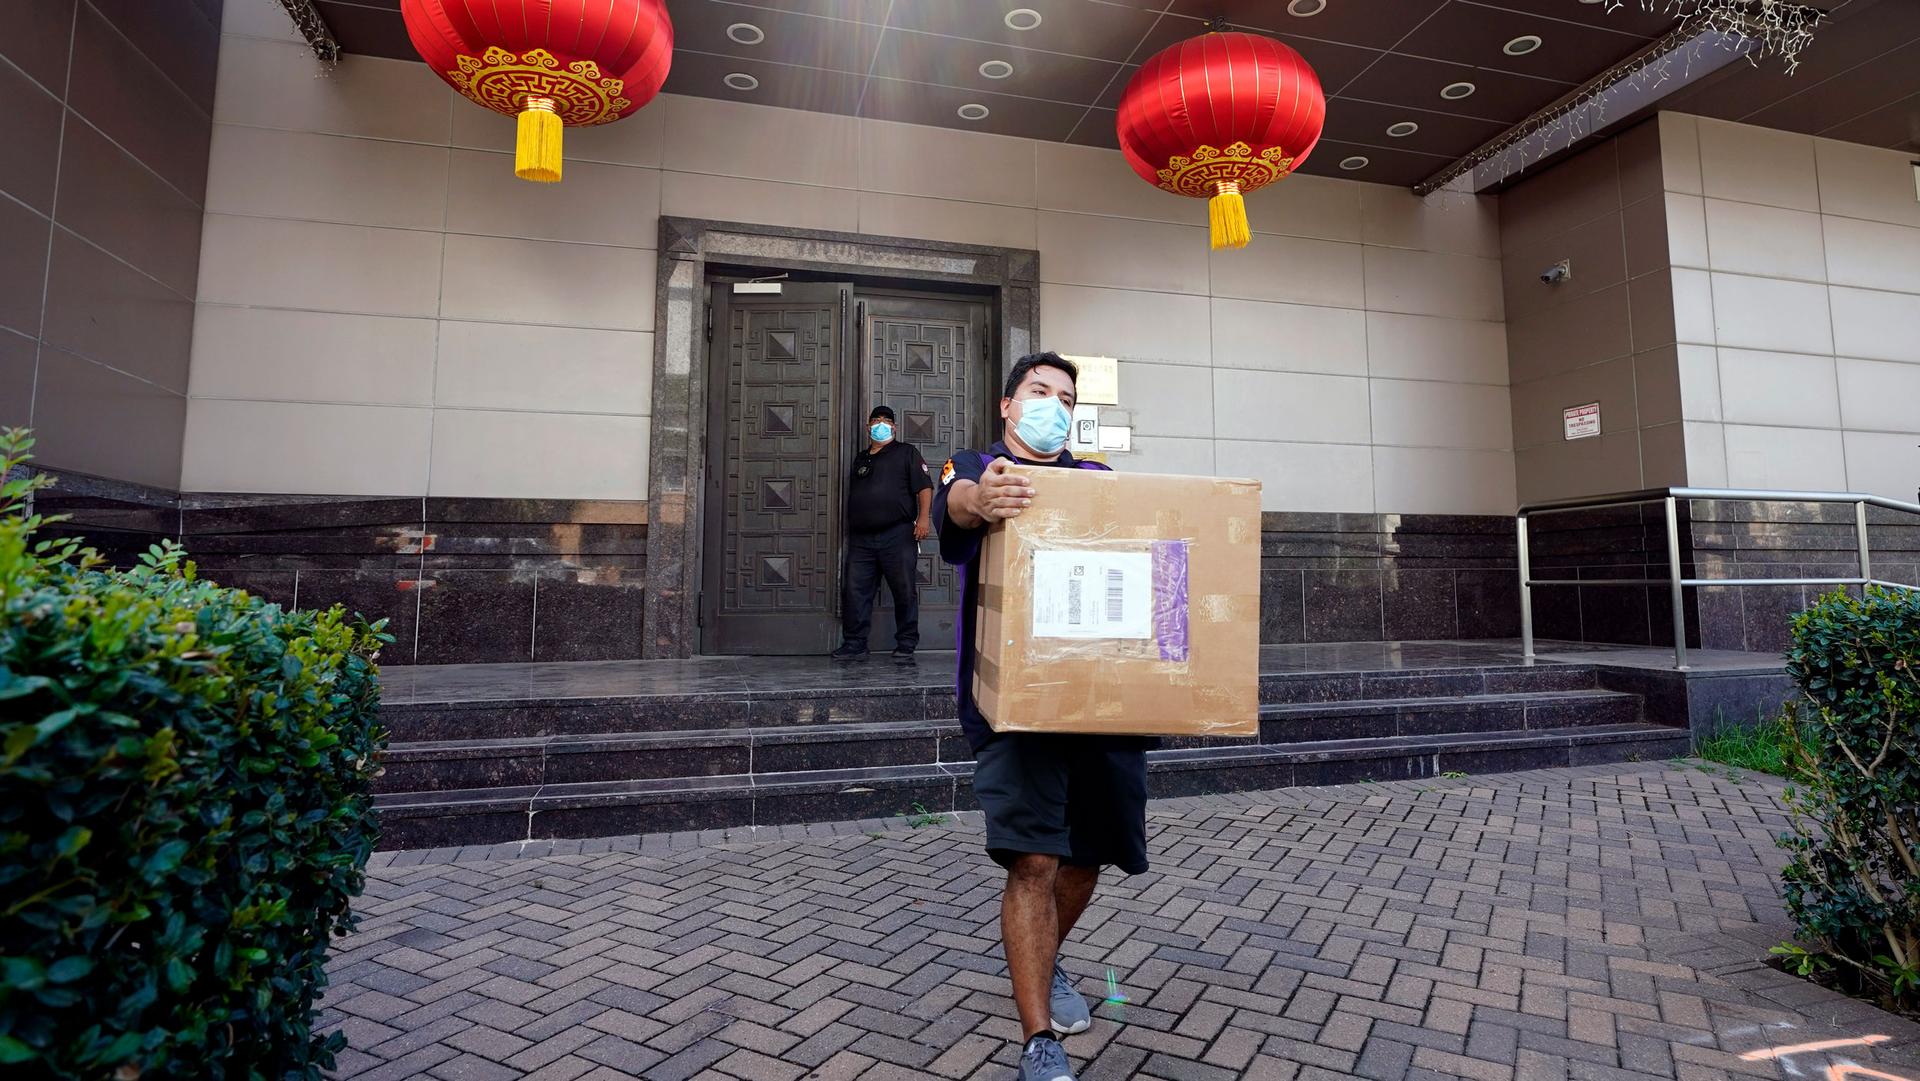 A man is shown wearing a face mask and carrying a large brown cardboard box with the doors of the Chinese Consulate in Houston in the background.